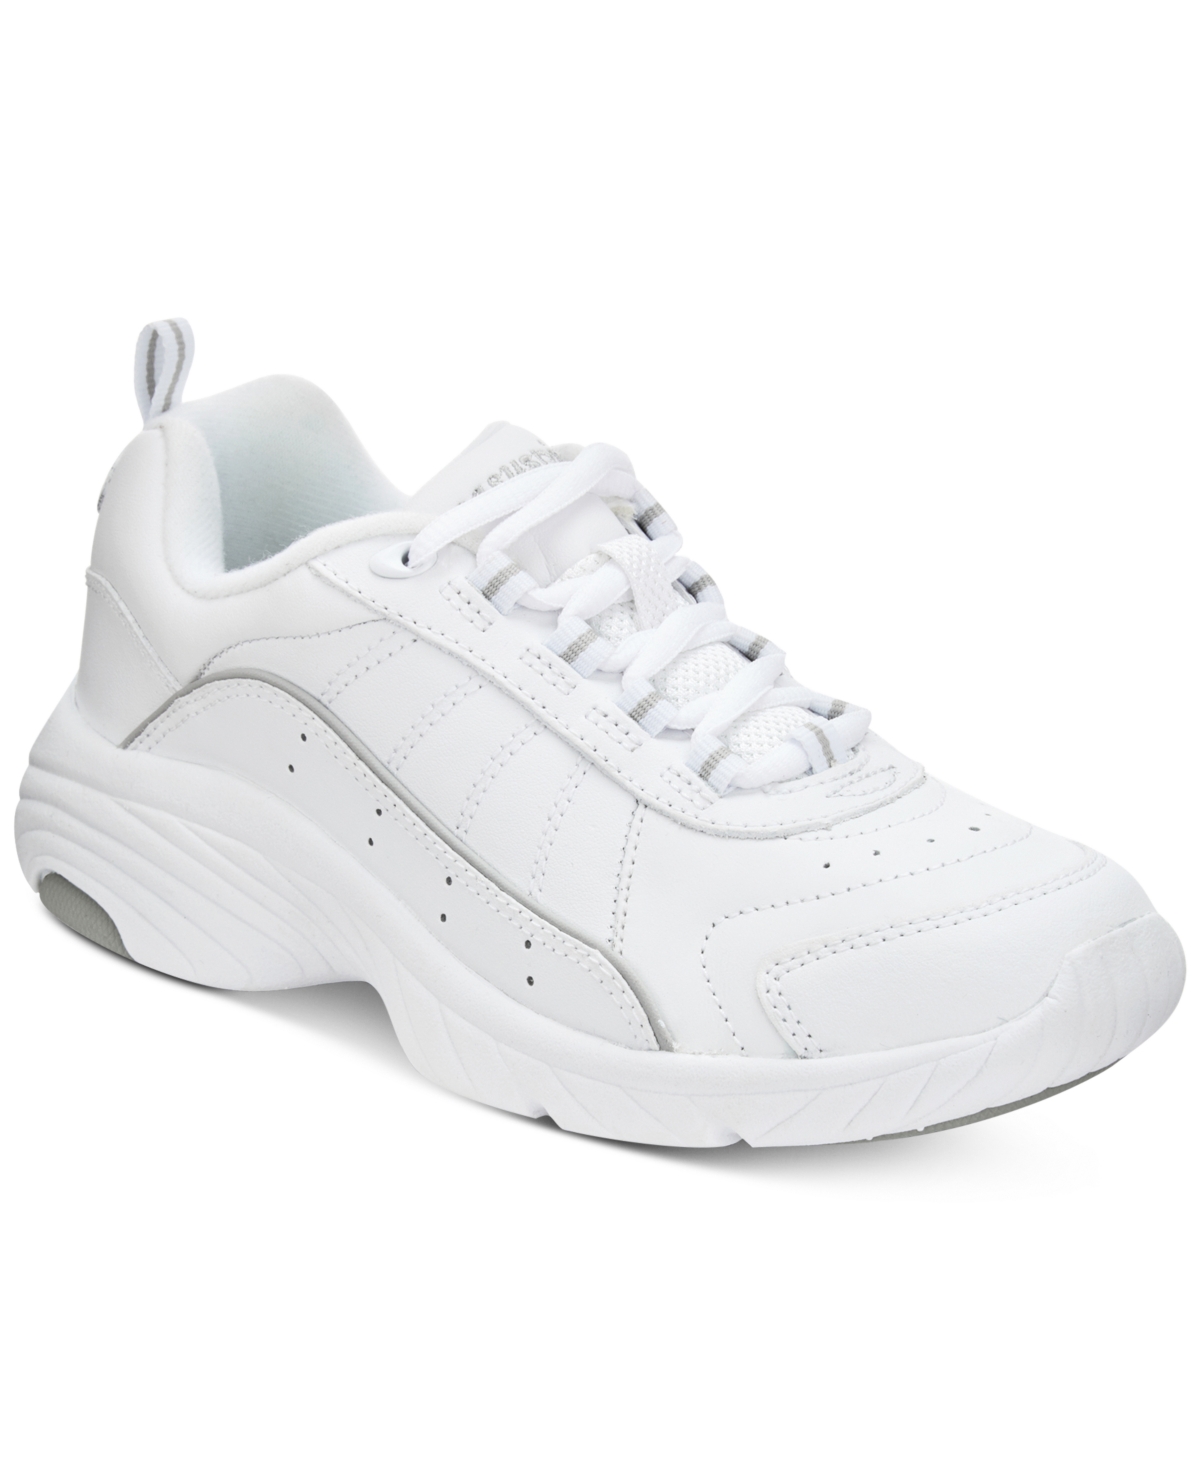 UPC 740362339058 product image for Easy Spirit Punter Sneakers Women's Shoes | upcitemdb.com